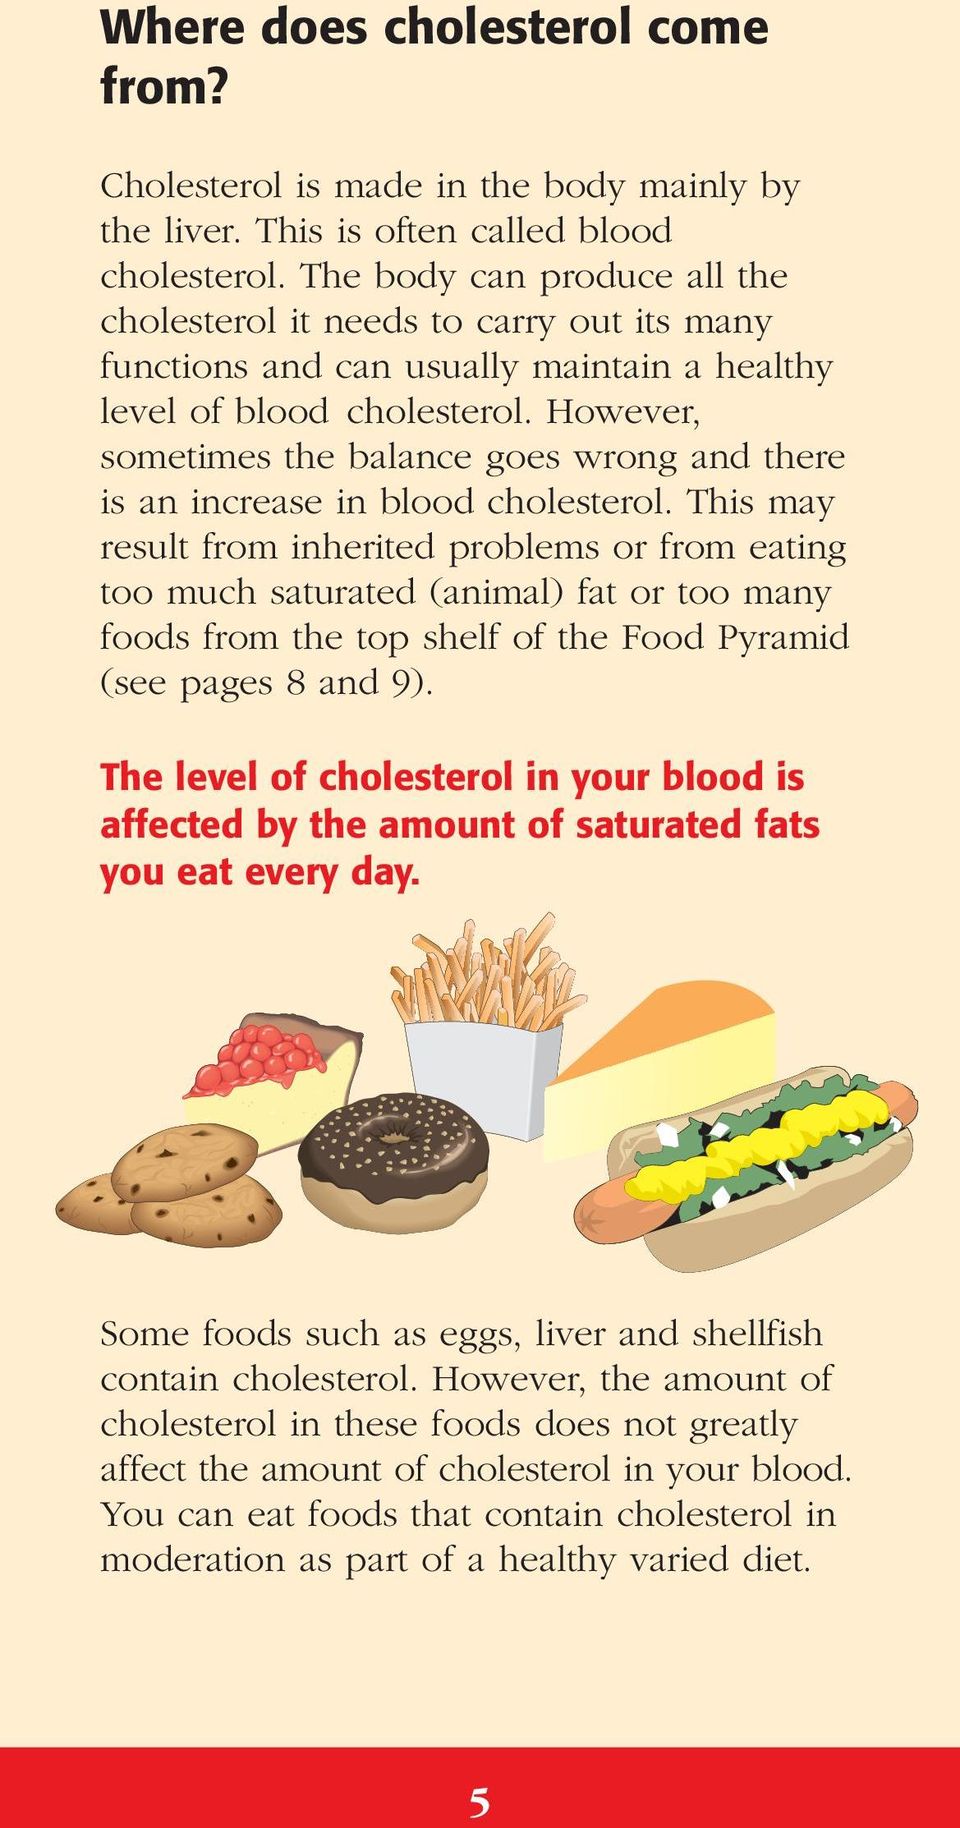 However, sometimes the balance goes wrong and there is an increase in blood cholesterol.